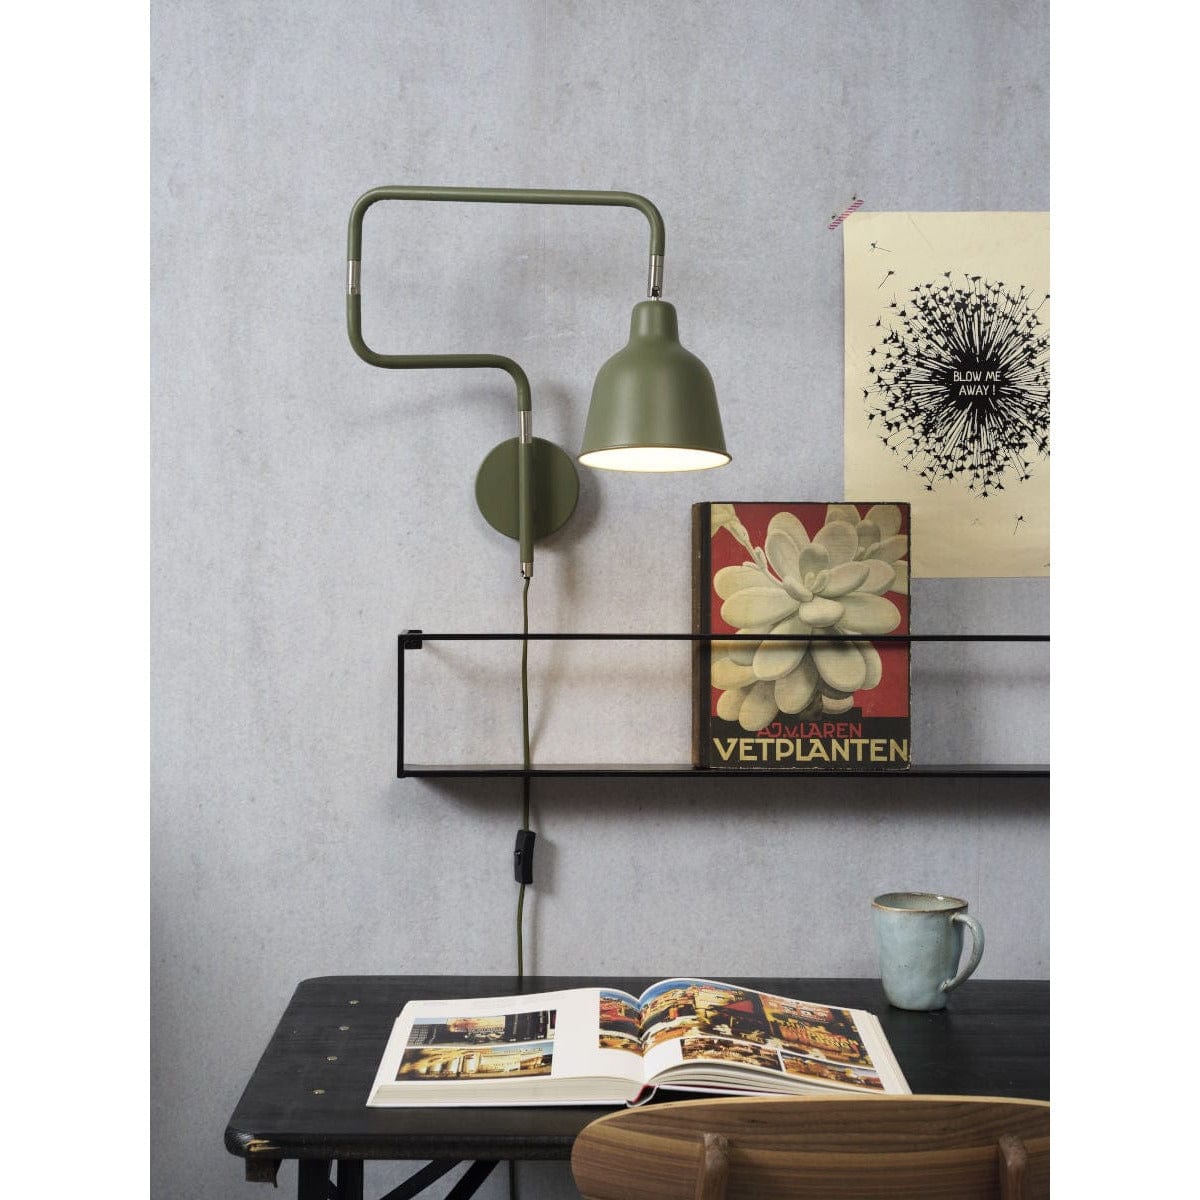 It's About RoMi Wall Lights Olive Green London Wall Lamp, Black, Olive Green or White